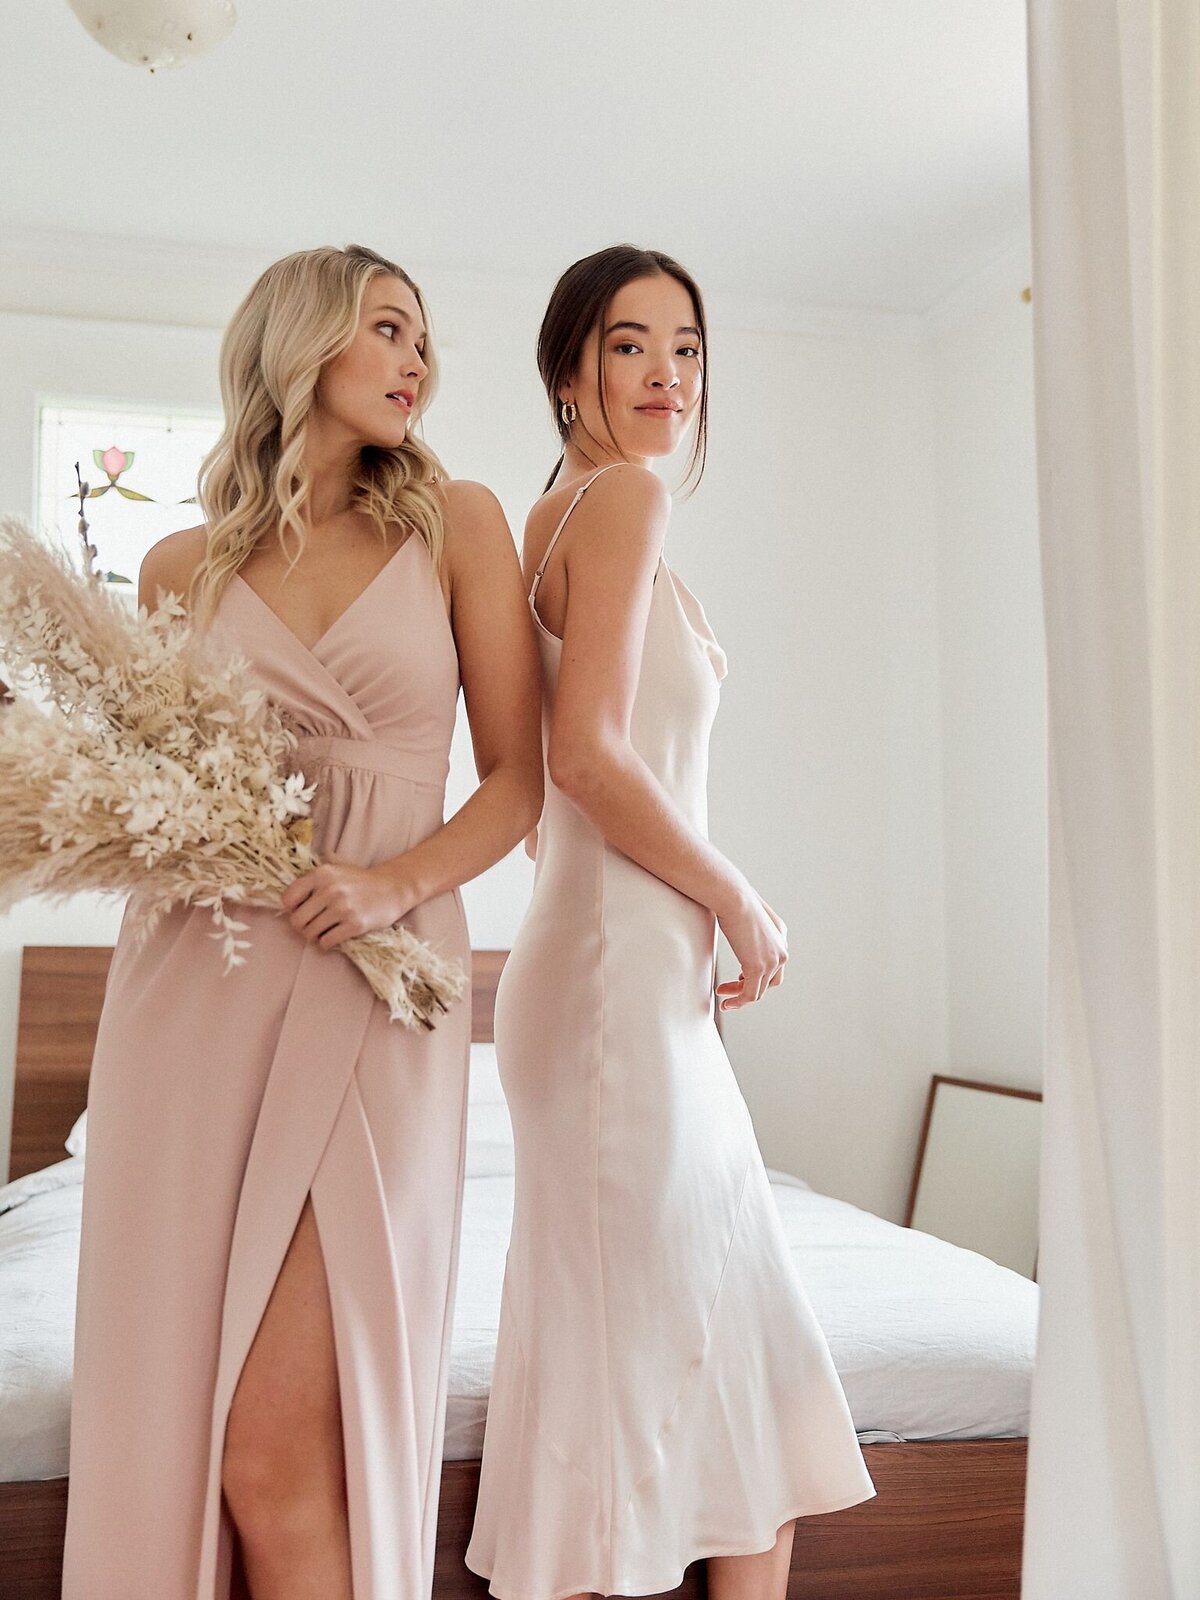 Modern and romantic pink bridesmaids dresses by Park & Fifth, a modern bridal boutique based in Calgary, Alberta. Featured on the Brontë Bride Vendor Guide.